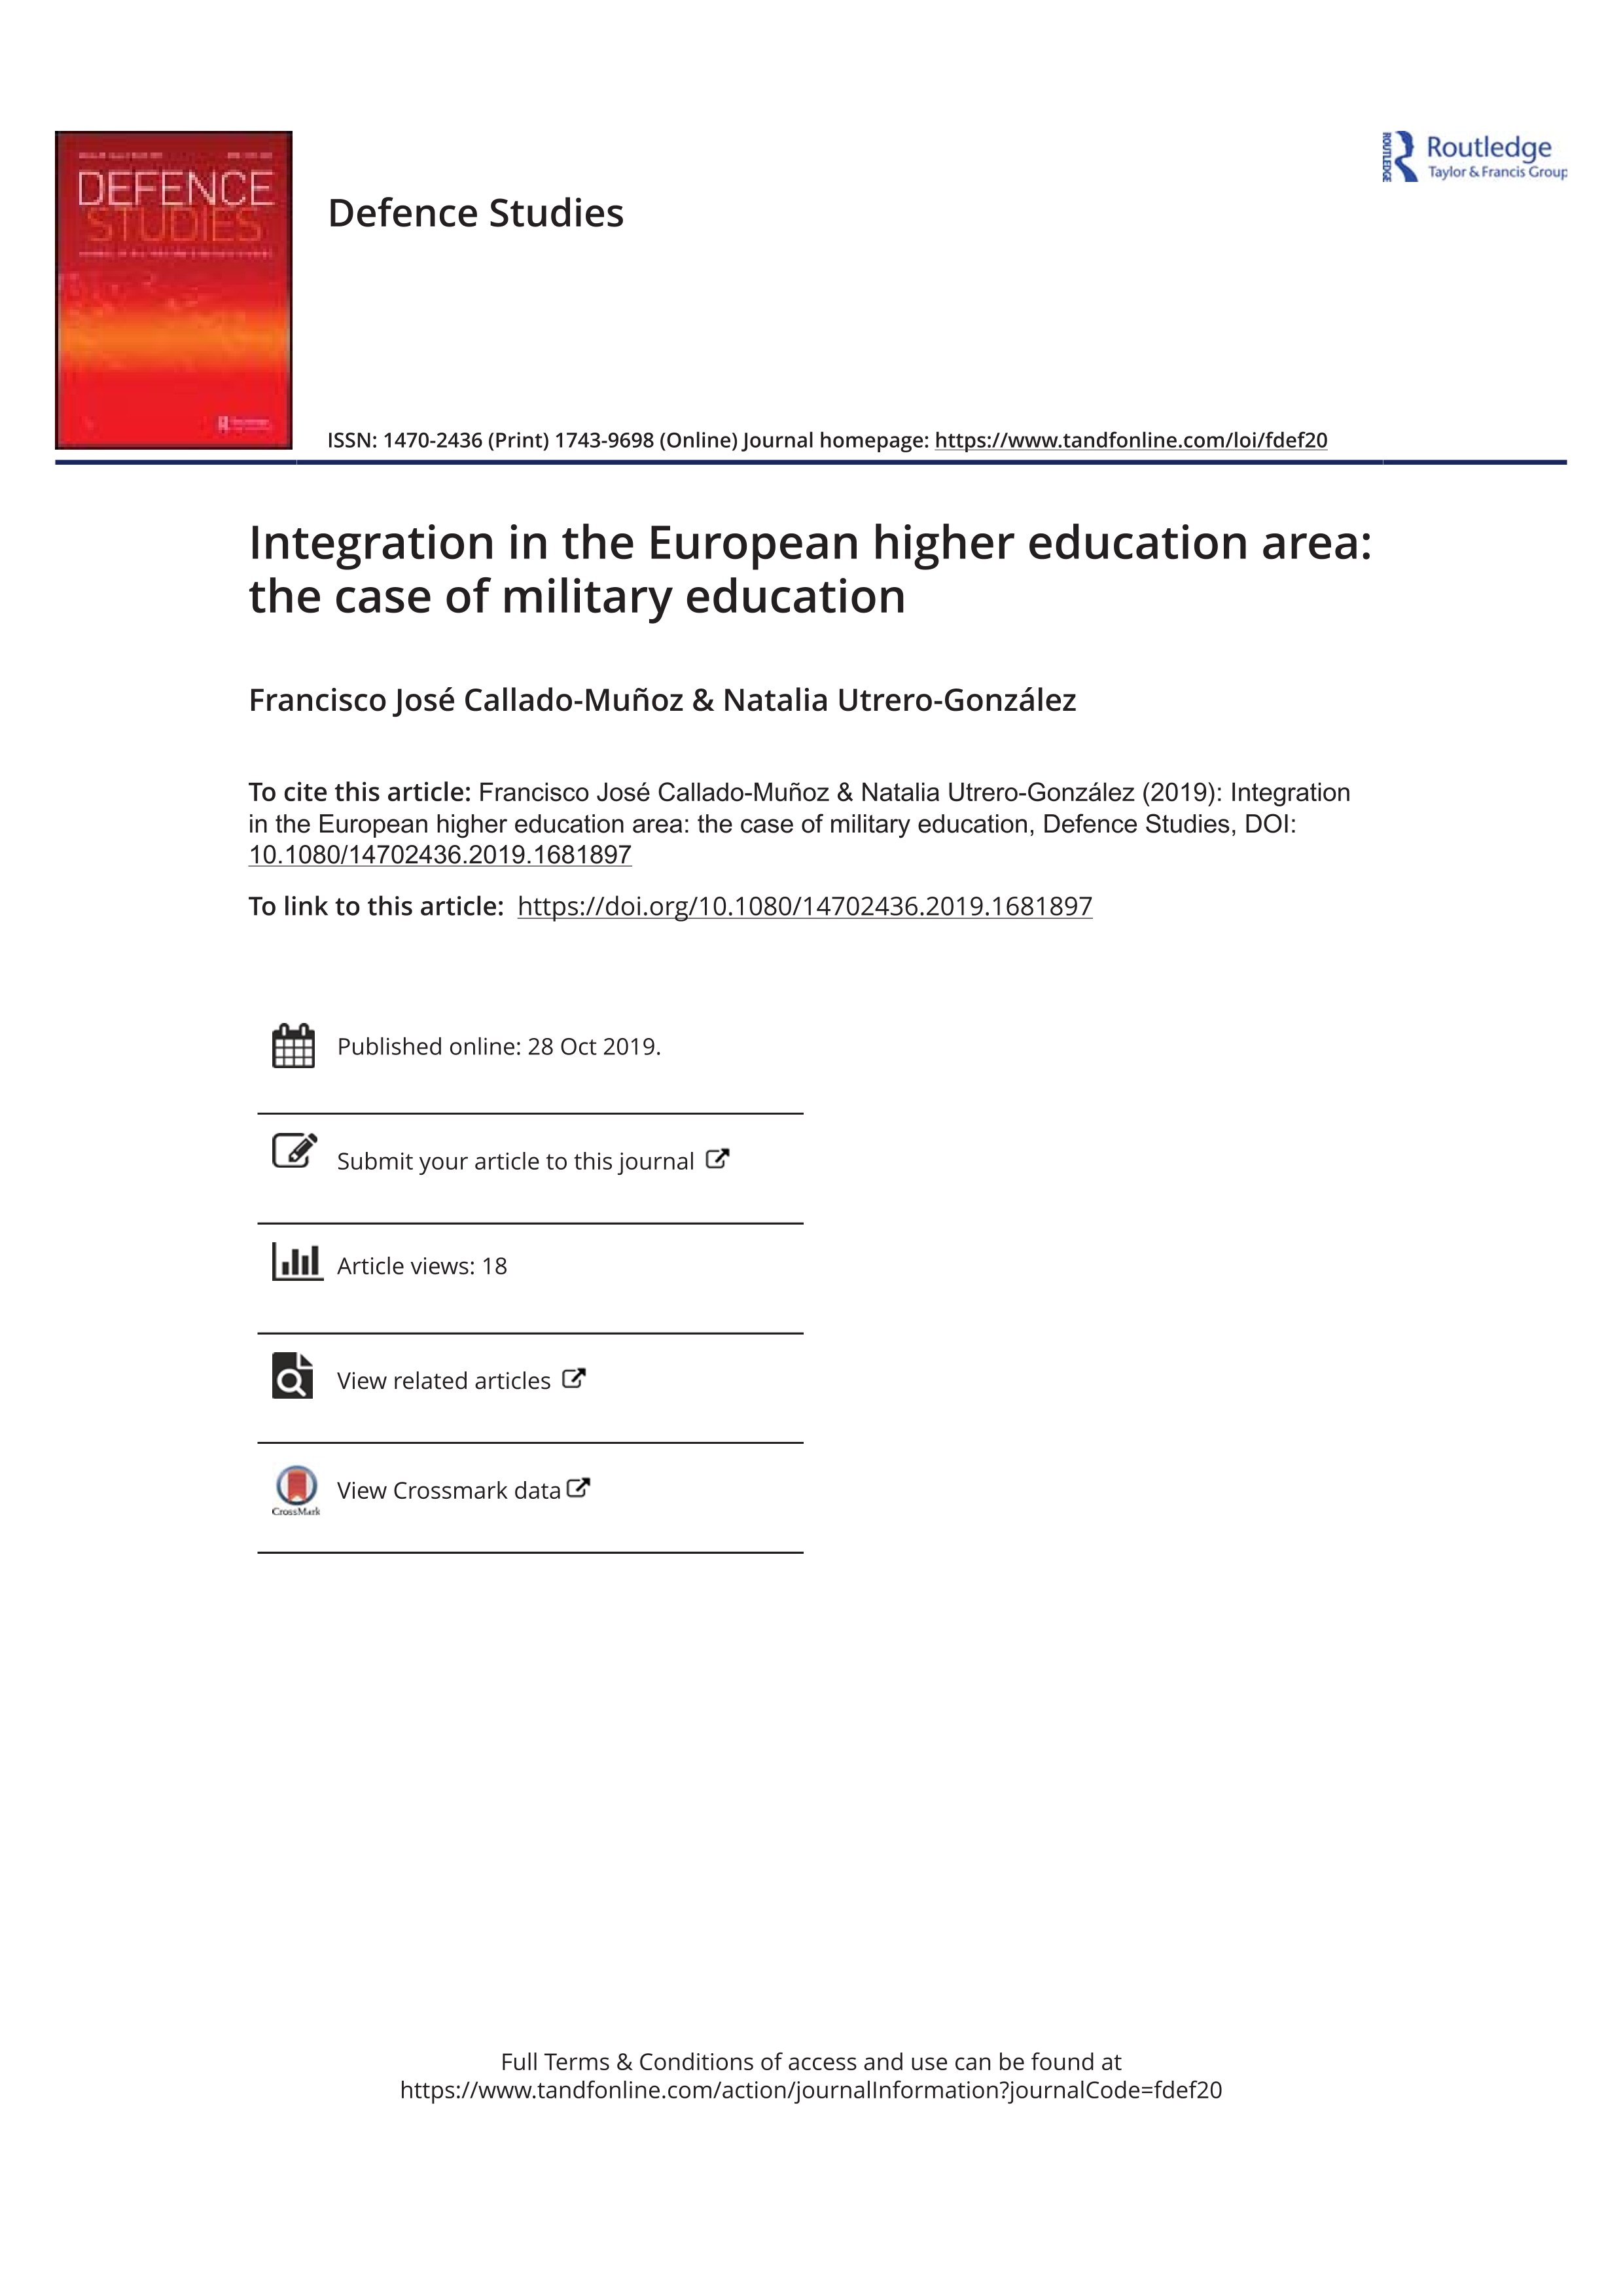 Integration in the European higher education area: the case of military education